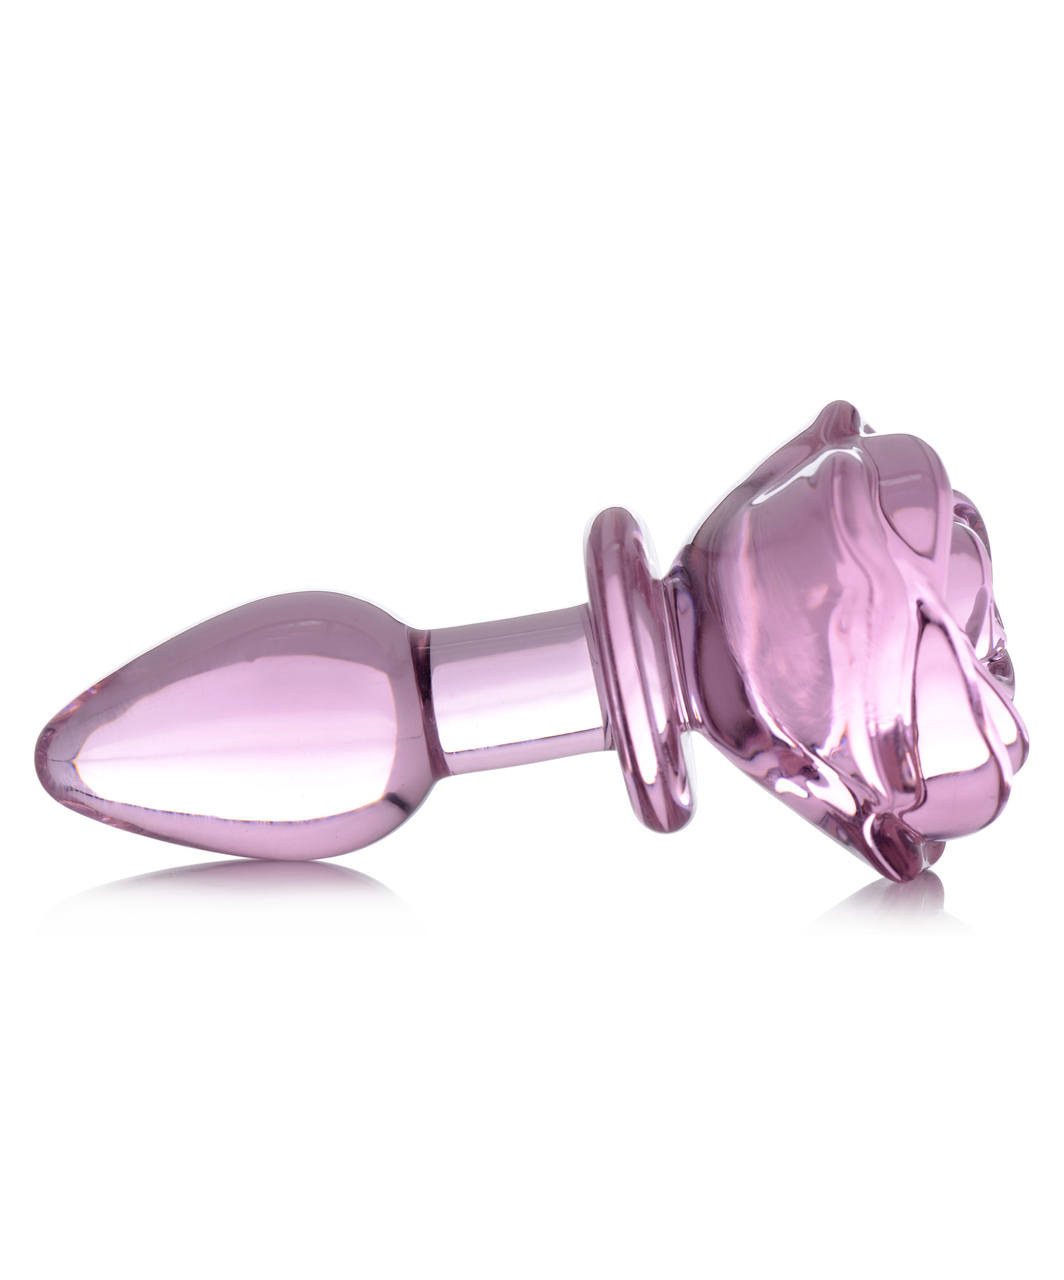 Booty Sparks Pink Rose Glass Anal Plug Small